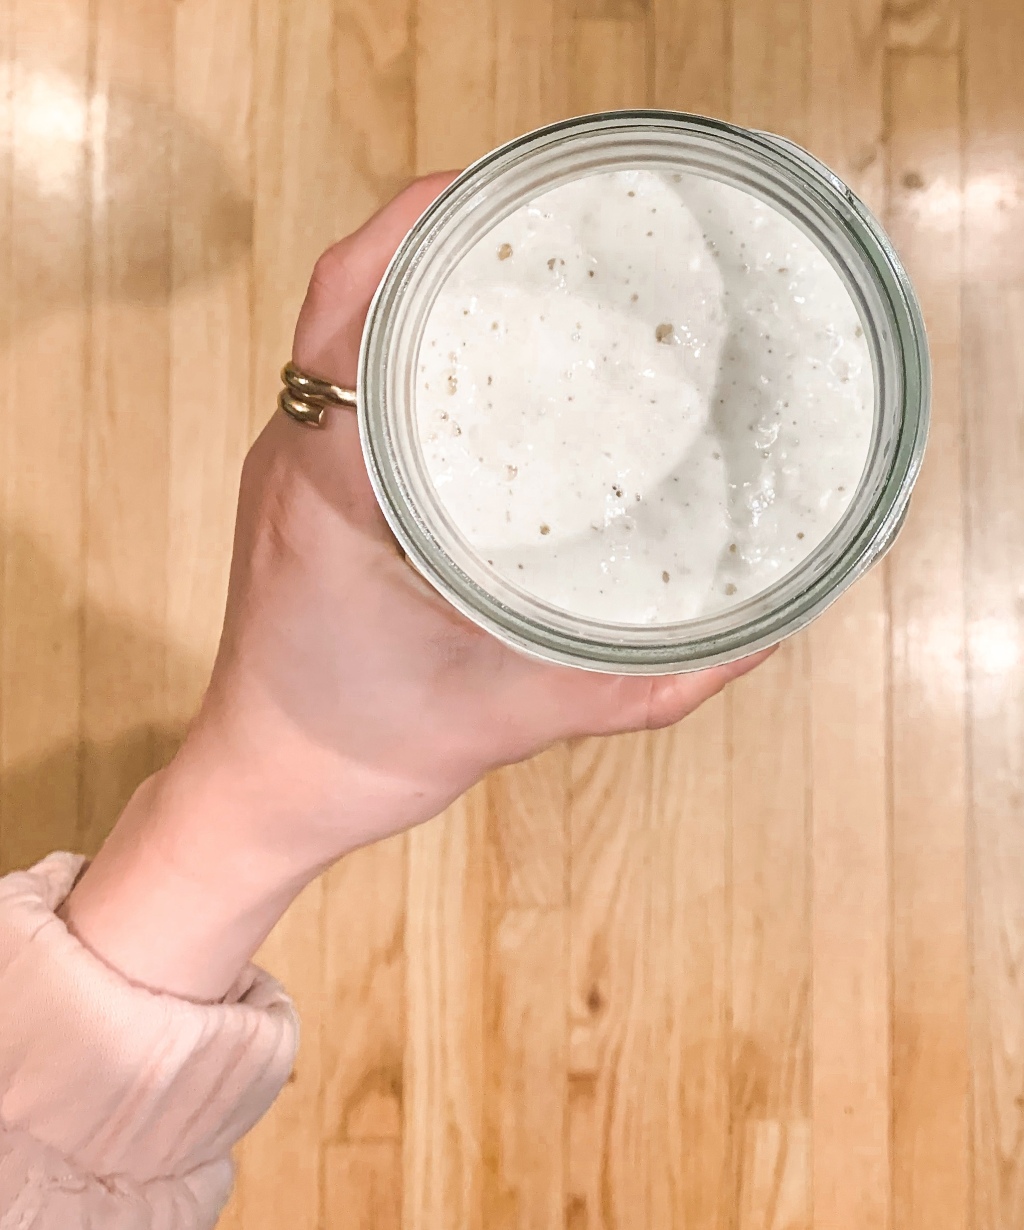 How To: Make Your Own Sourdough Starter